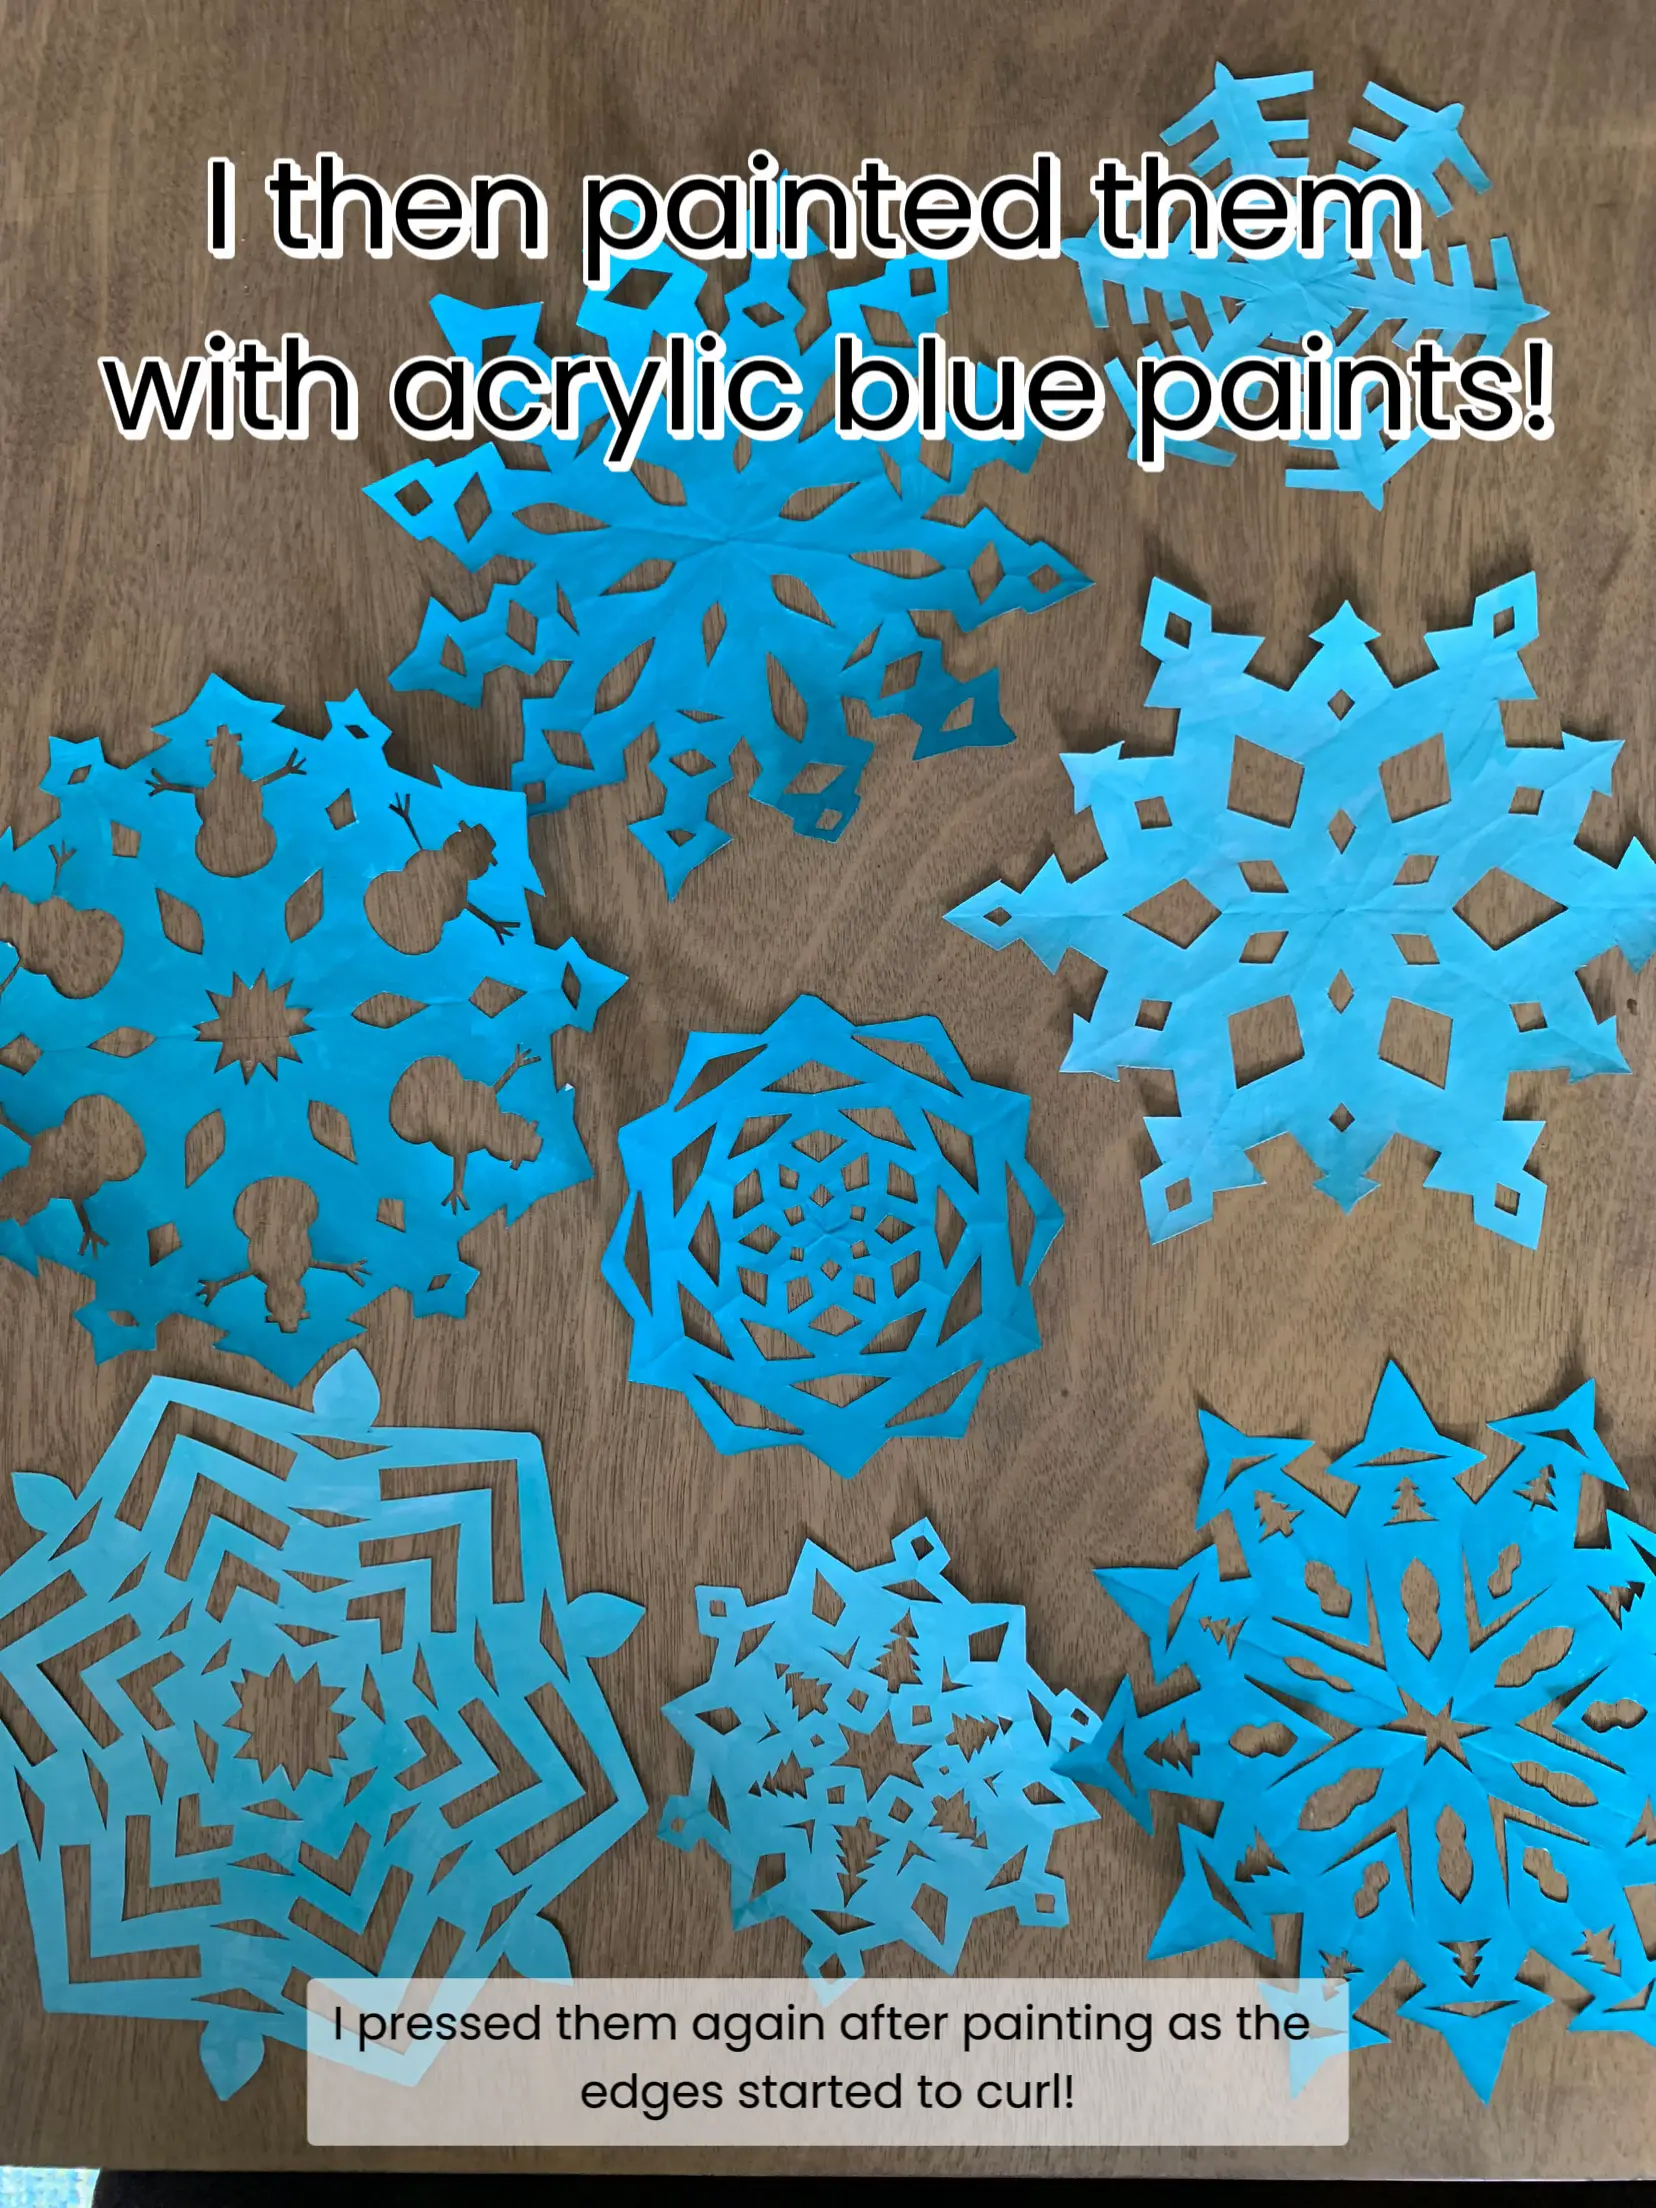 Snow Crystals Paper Snowflake Cutouts - The Crafty Smiths